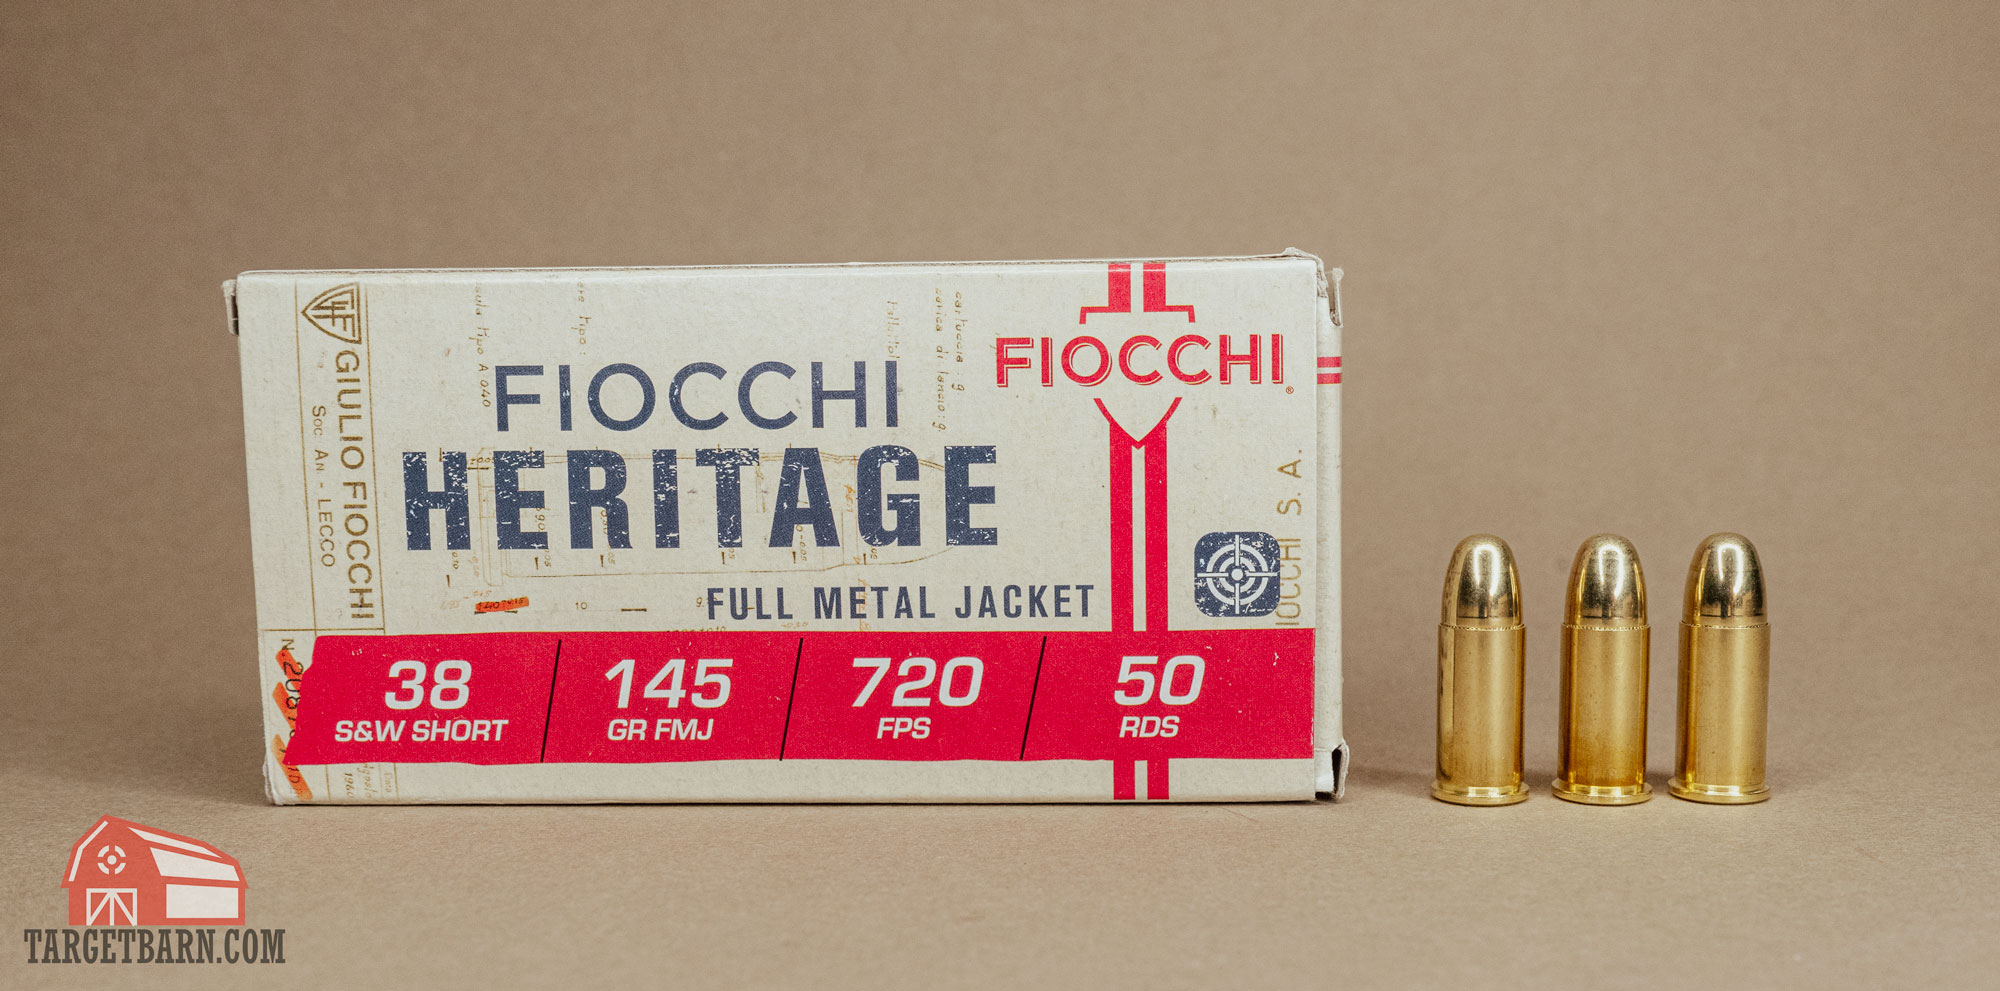 a box and three rounds of fiocchi heritage .38 S&W fmj ammo